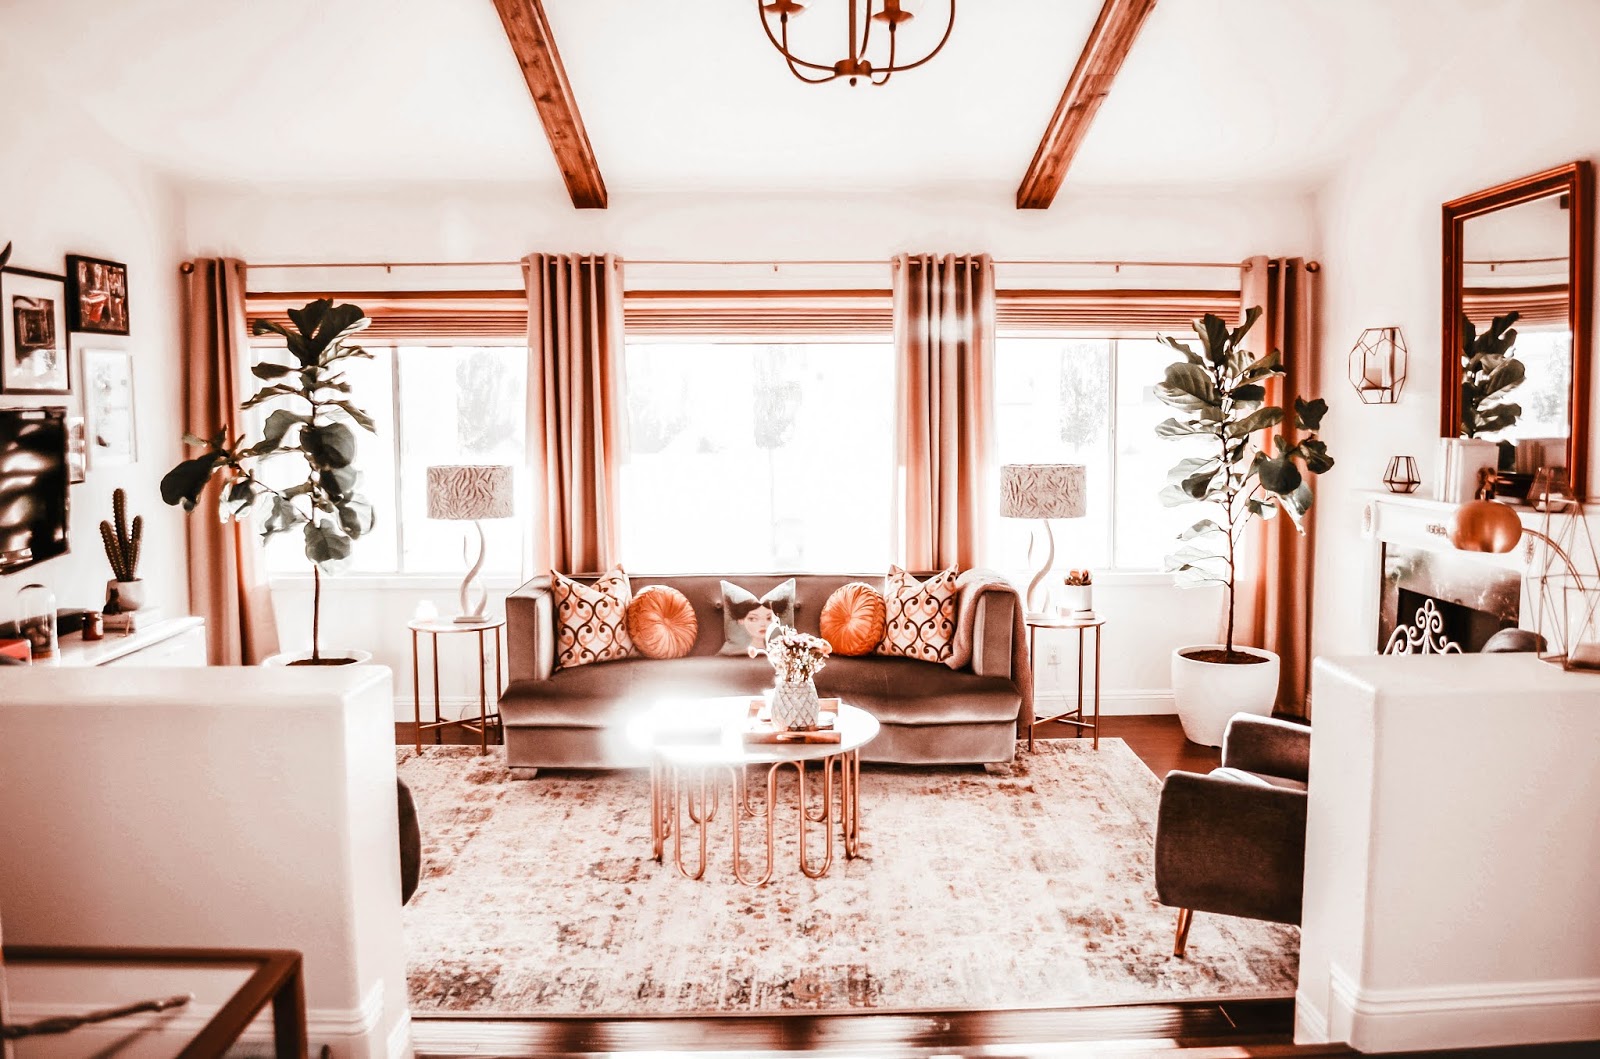 1980s-style-house-livingroom-renovation-update-with-reclaimed-wood-beams-to-cathedral-ceilings